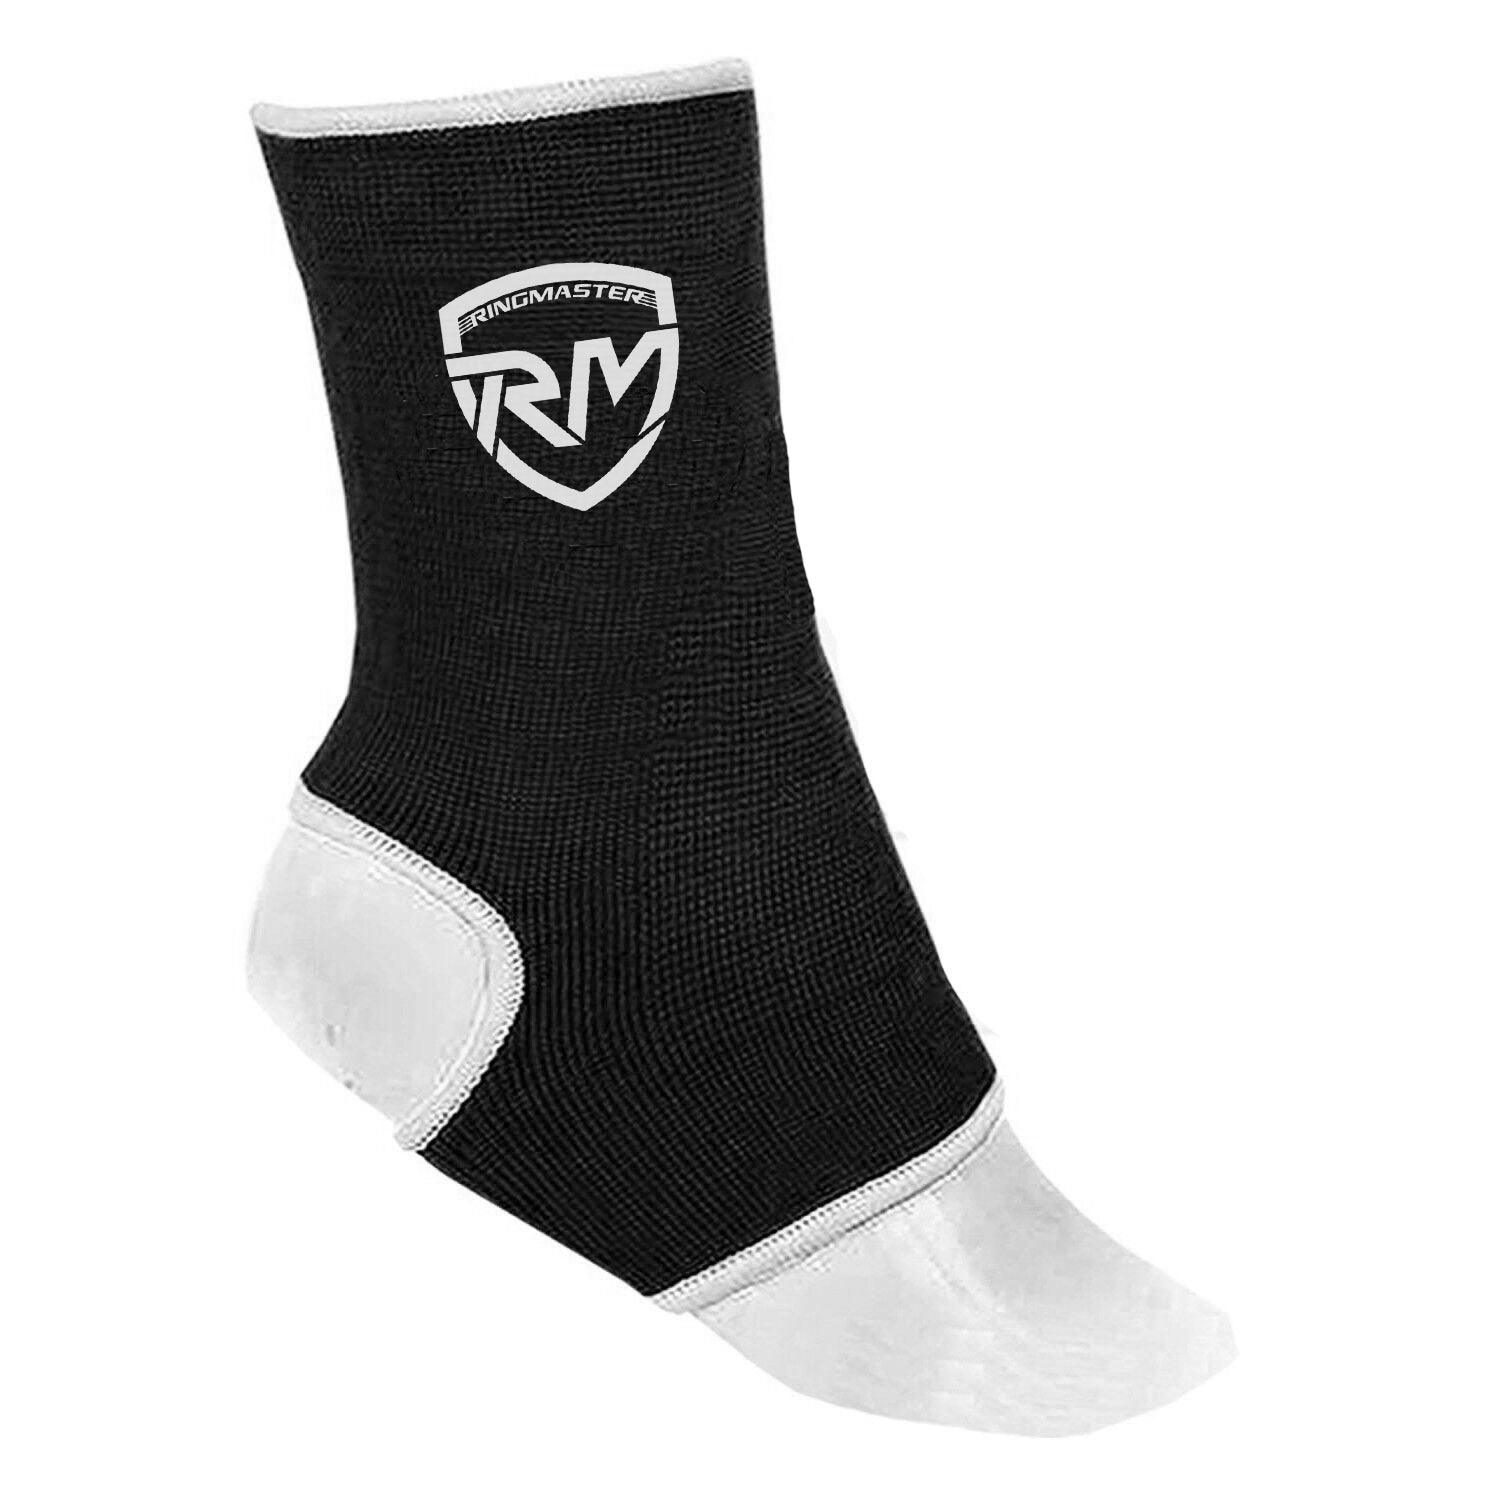 RingMaster Sports Ankle Support X Series One Size Black - RINGMASTER SPORTS - Made For Champions